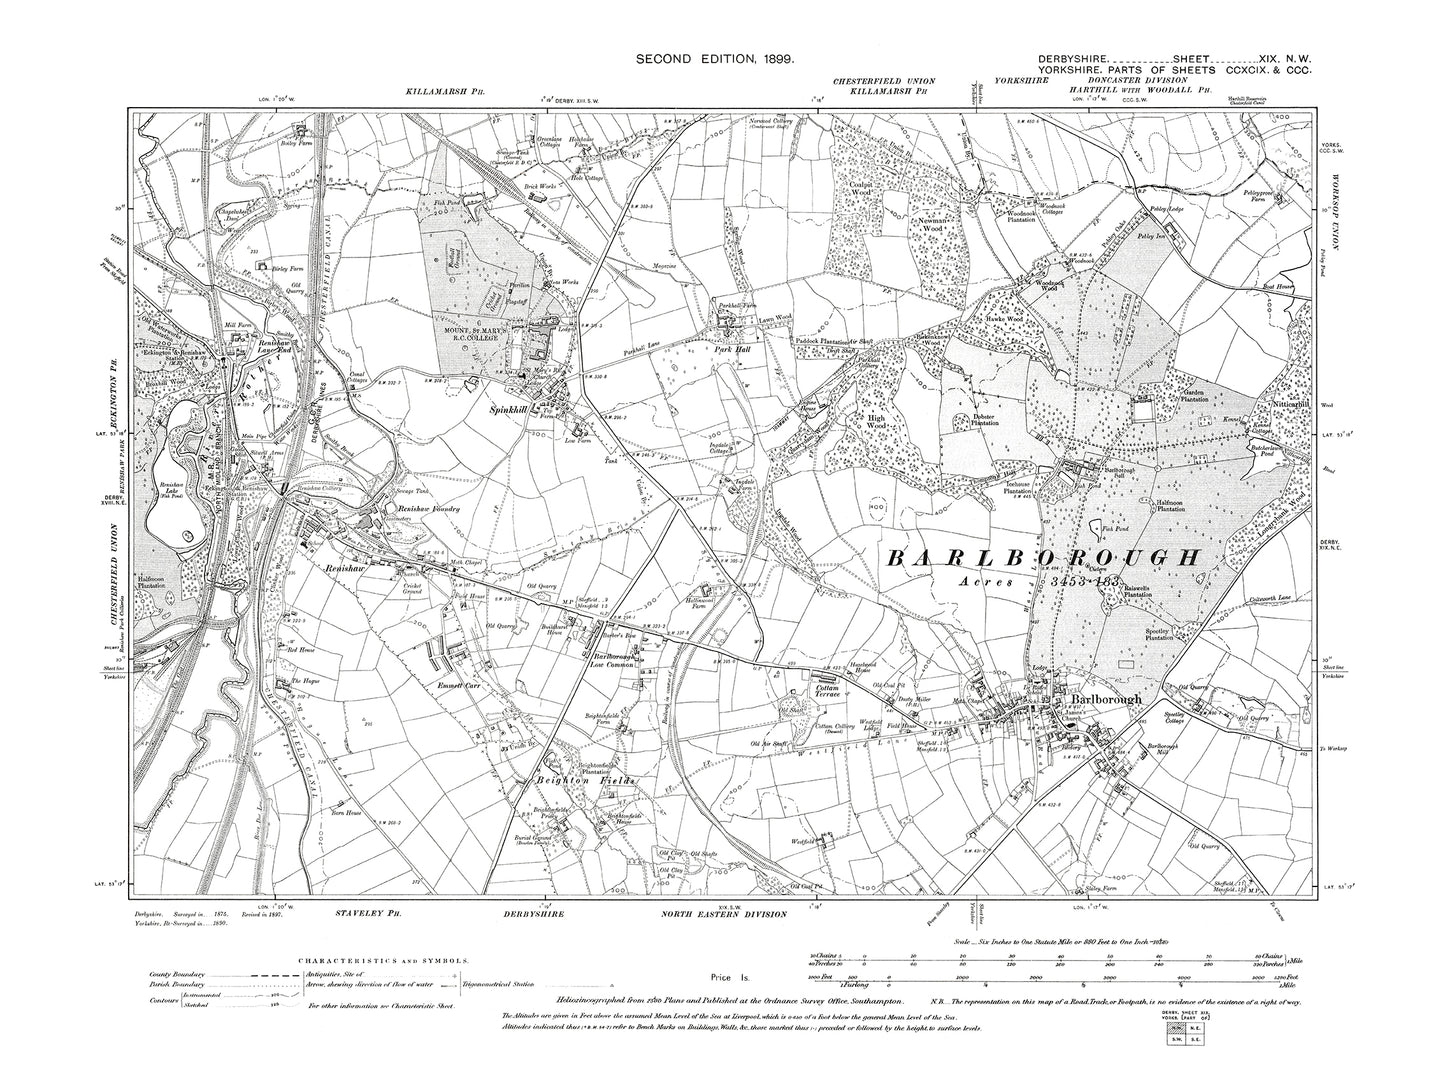 Old OS map dated 1899, showing Barlborough, Renishaw, Spinkhill in Derbyshire 19NW